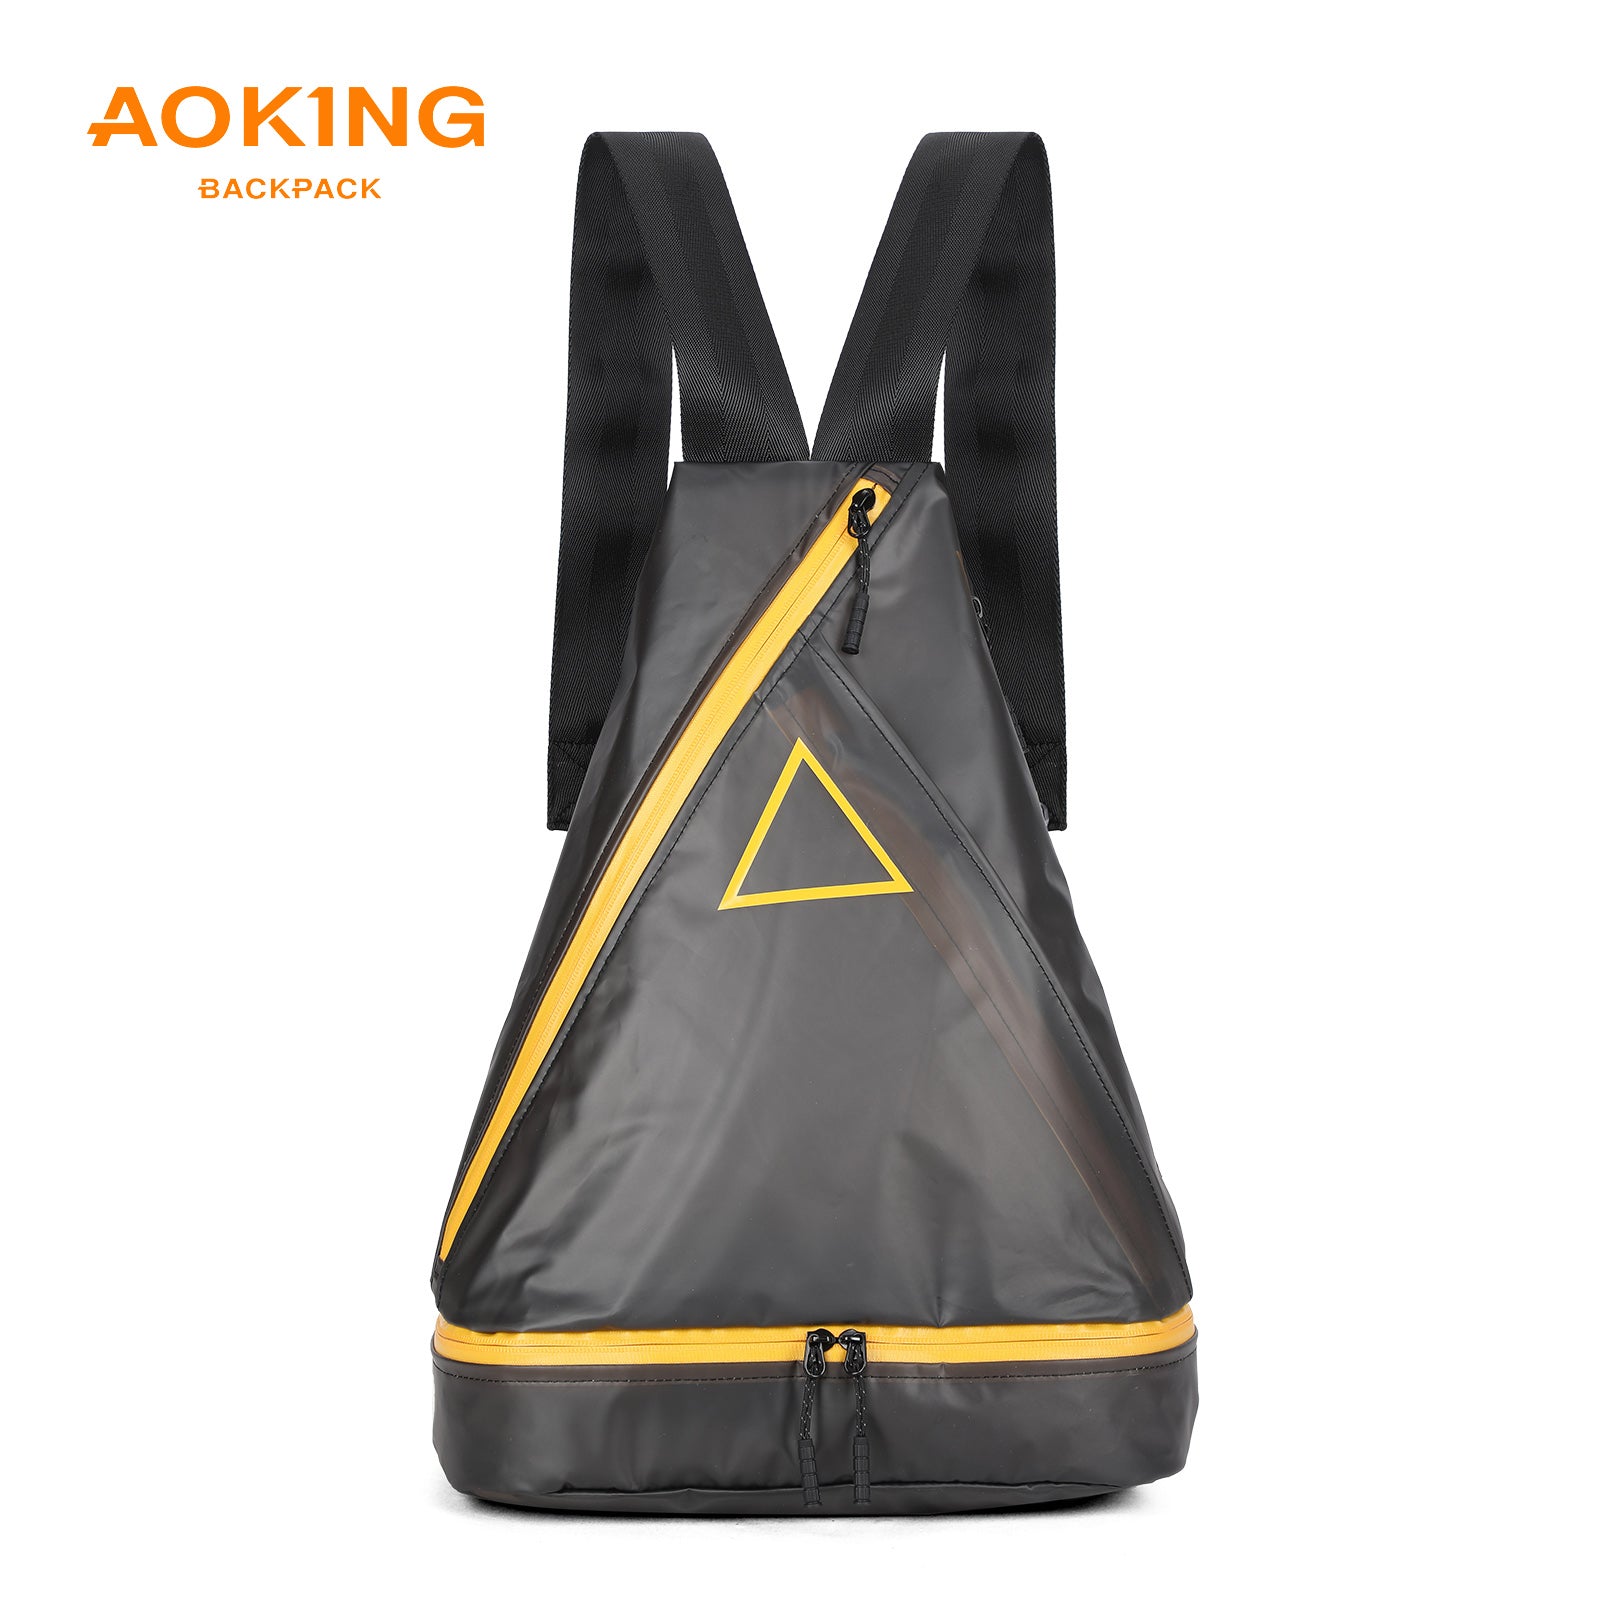 Aoking Latest Design Environmentally Friendly Material Raincoat Exchange Bag ZN3009